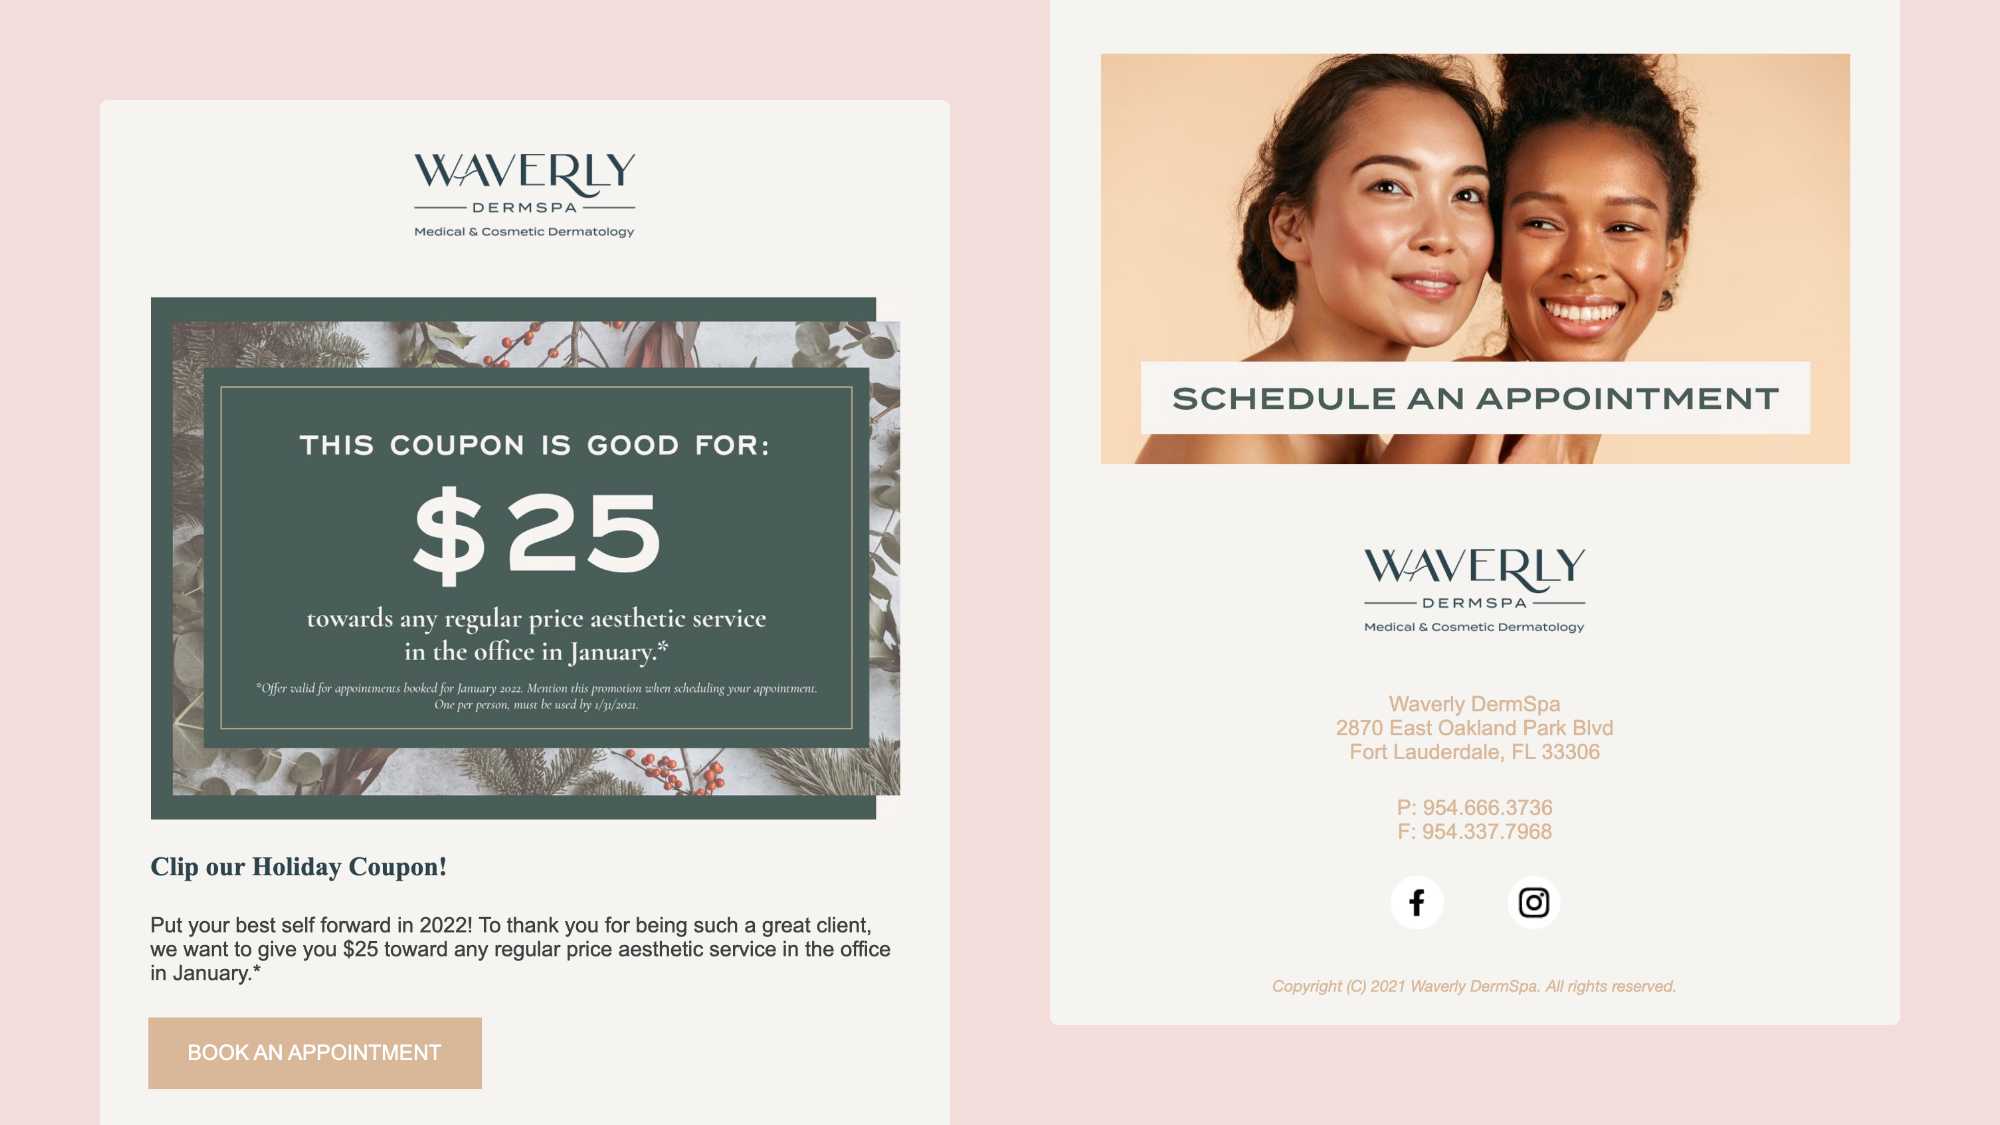 Two examples of a medical practice marketing email showing a coupon and prompt to schedule an appointment.